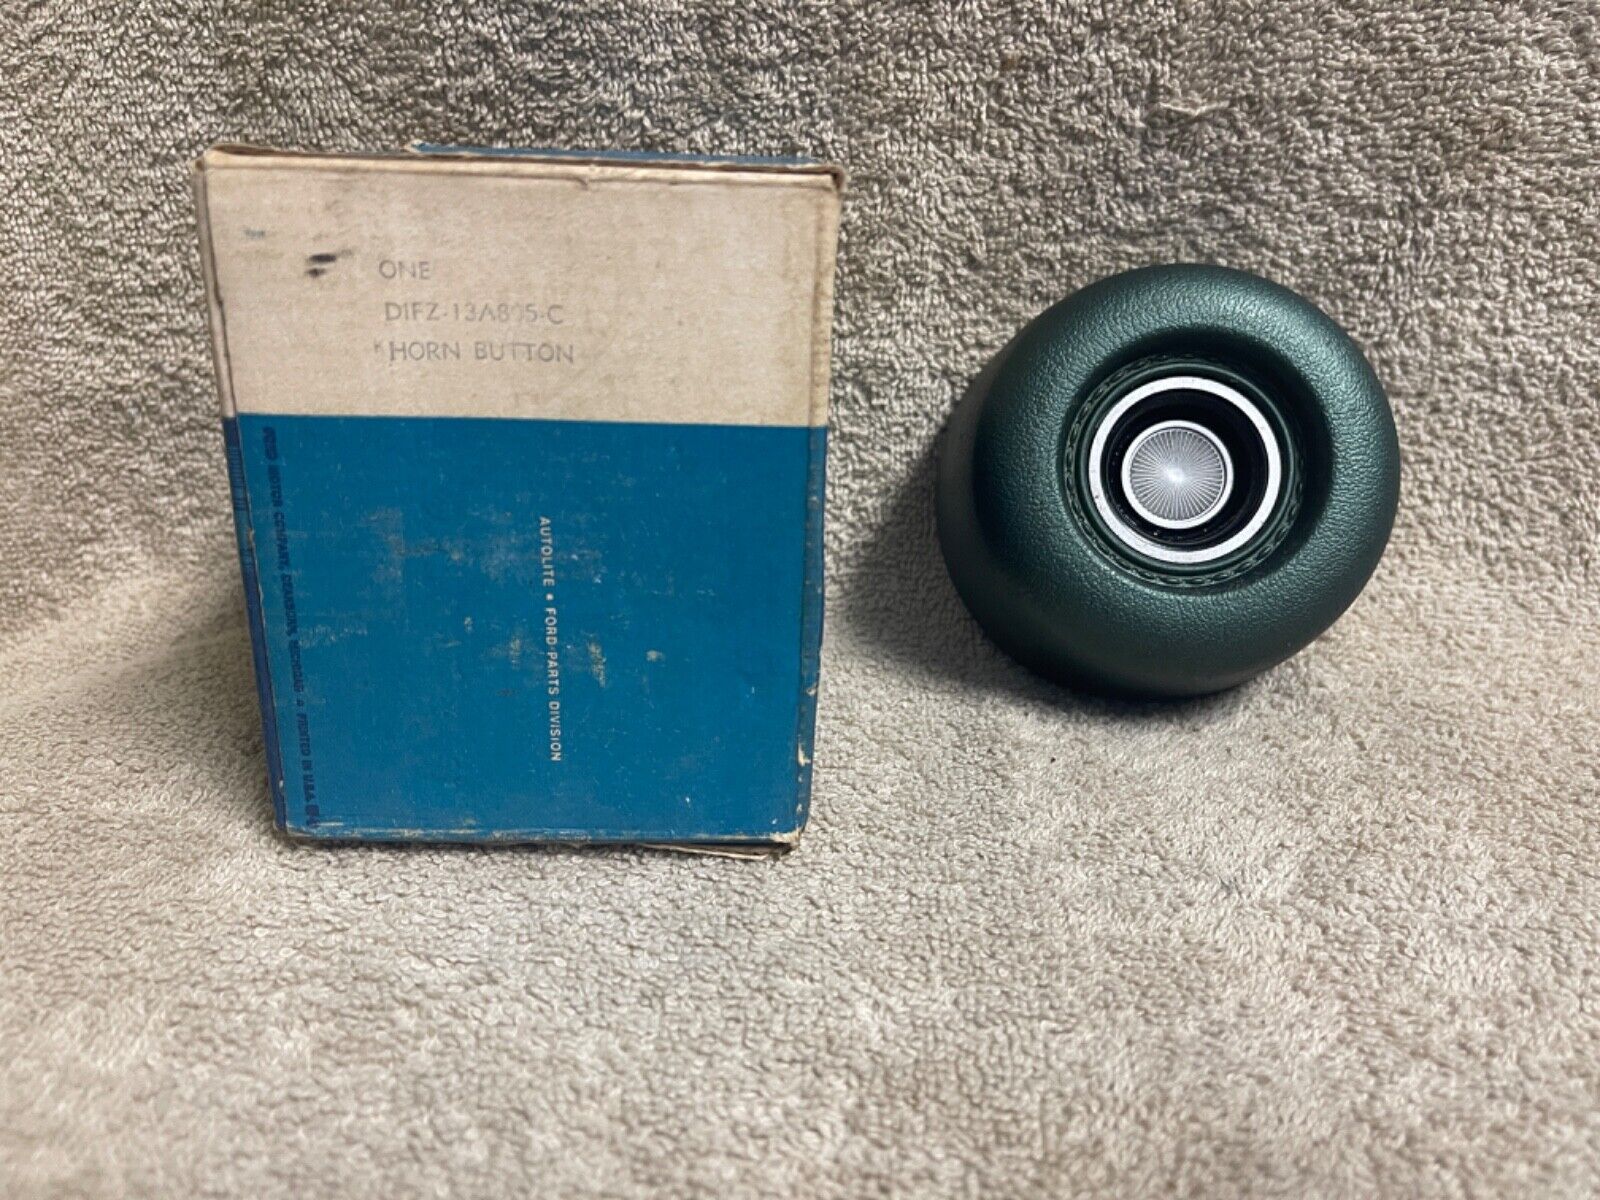 NOS FORD D1FZ-12A805-C 1971-73 PINTO STANDARD STEERING WHEEL GREEN HORN PAD